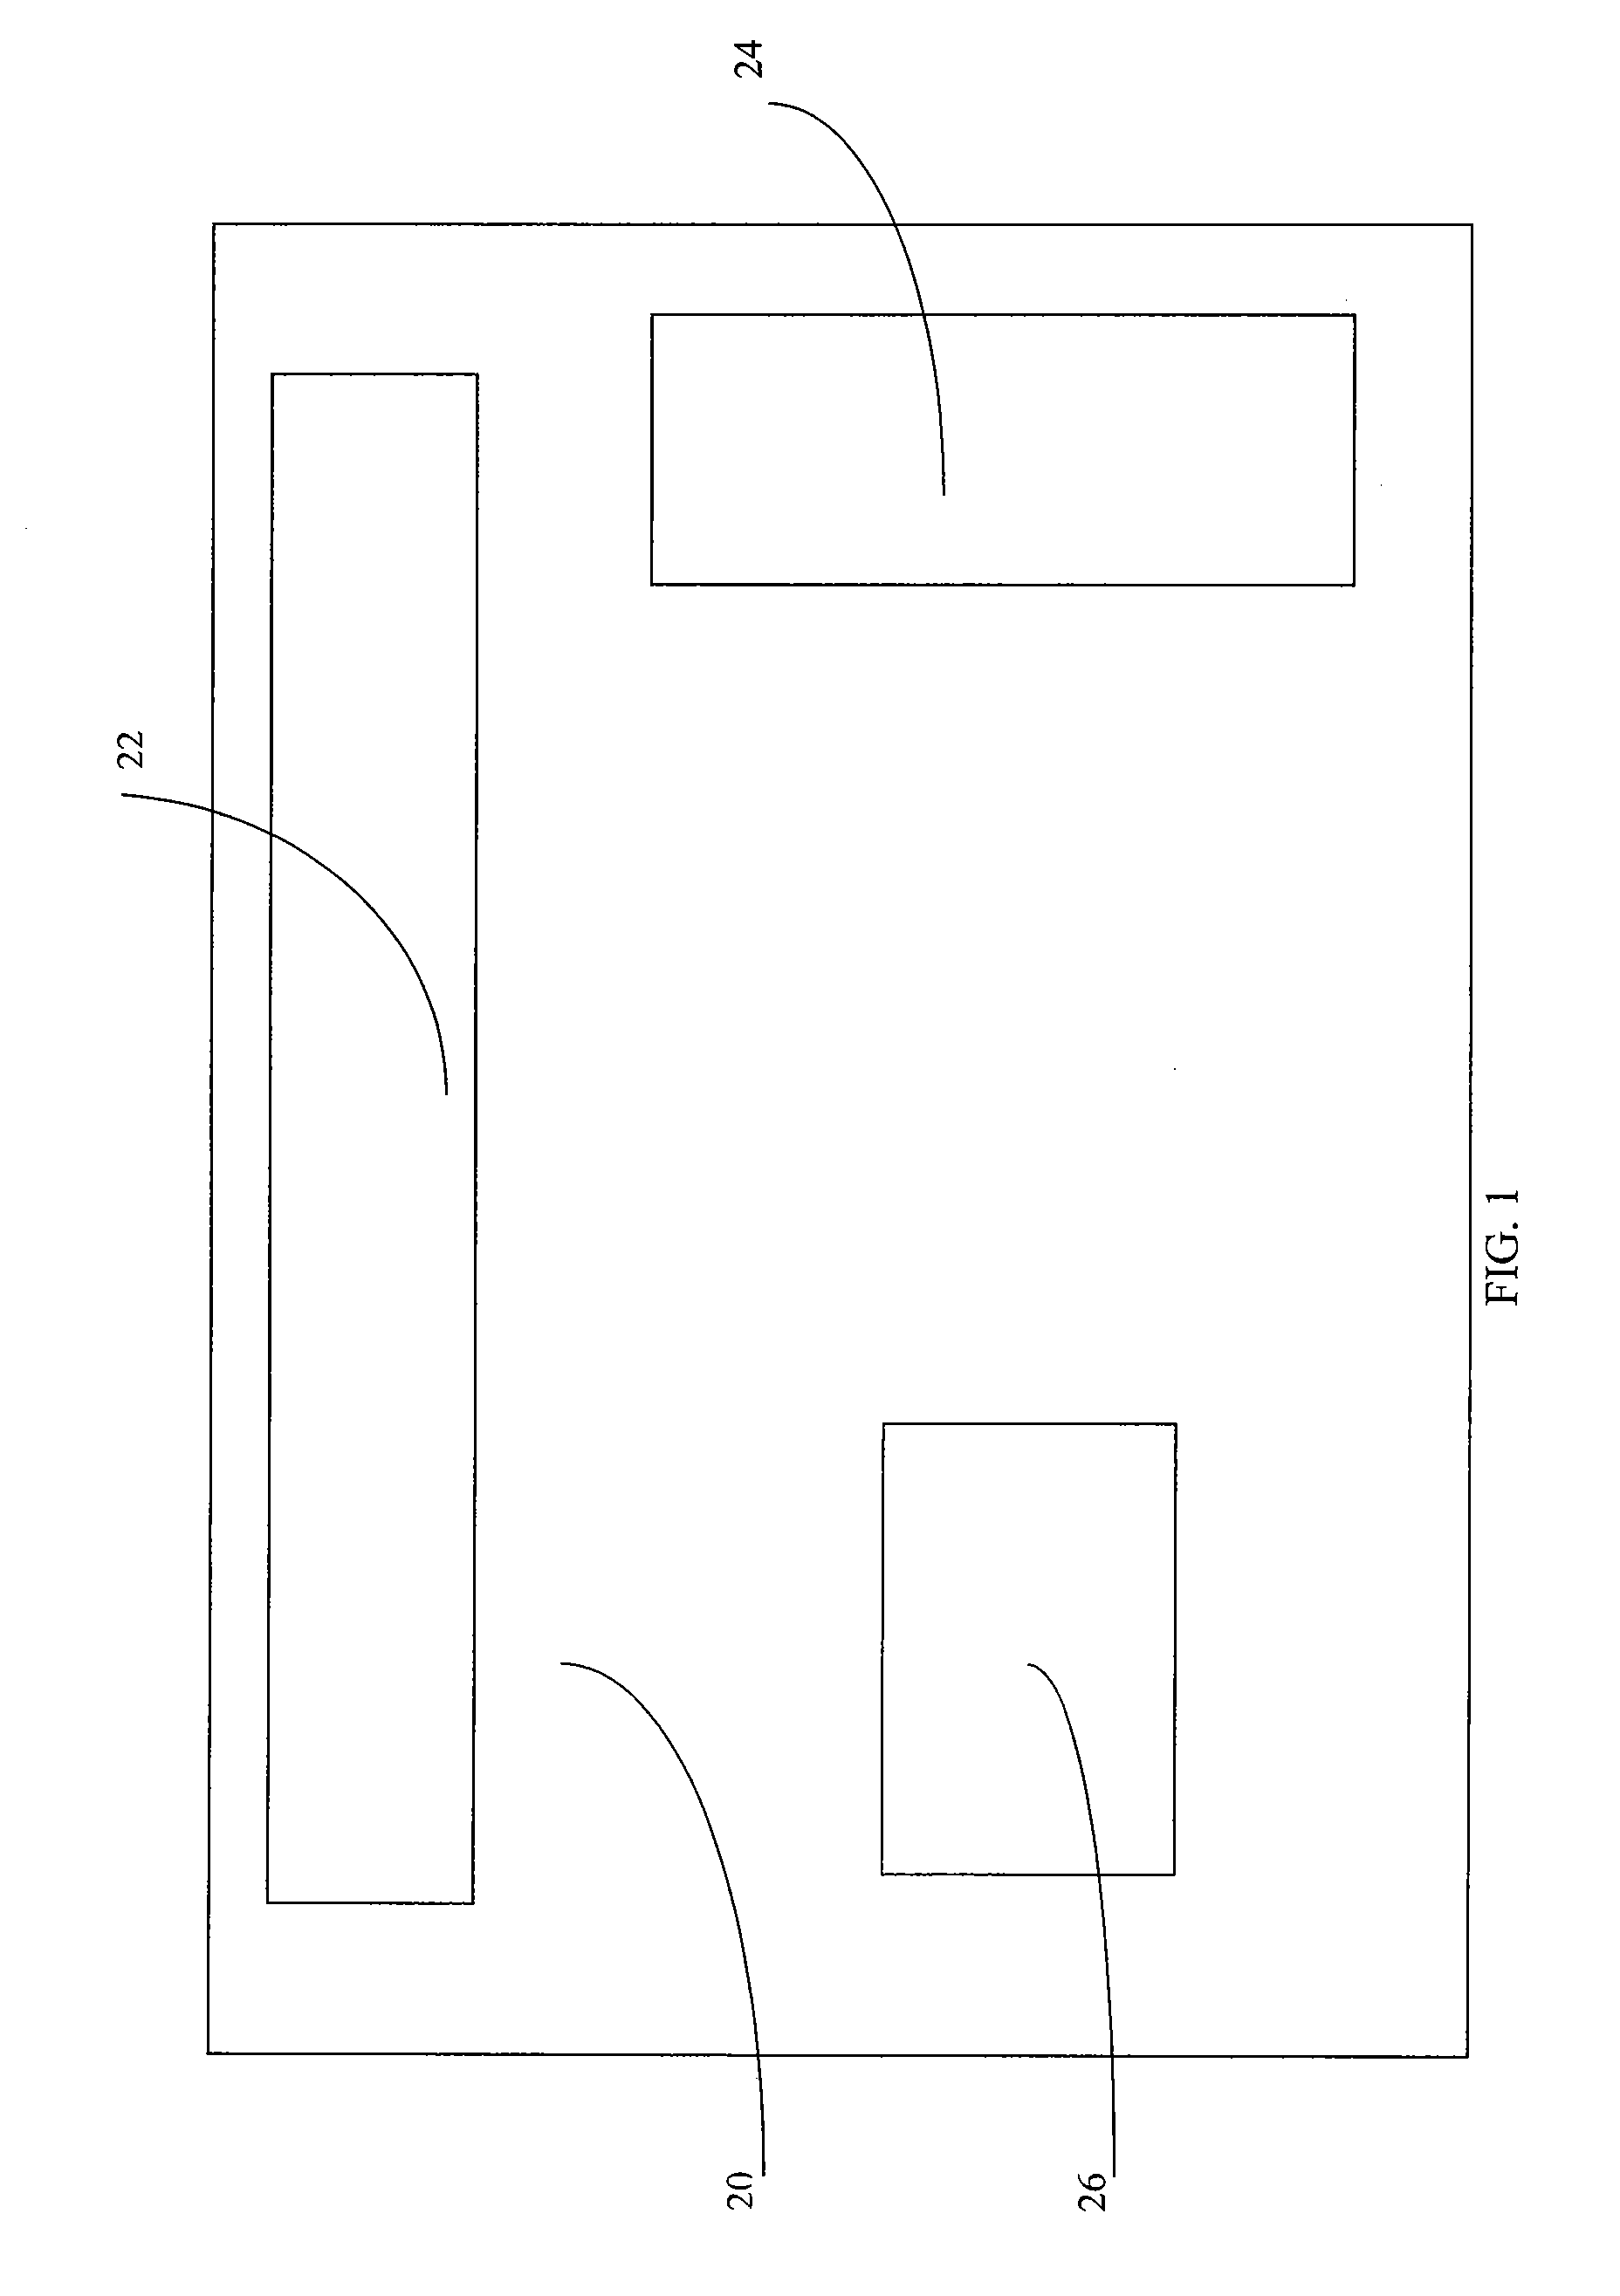 Advertising inventory management system and method